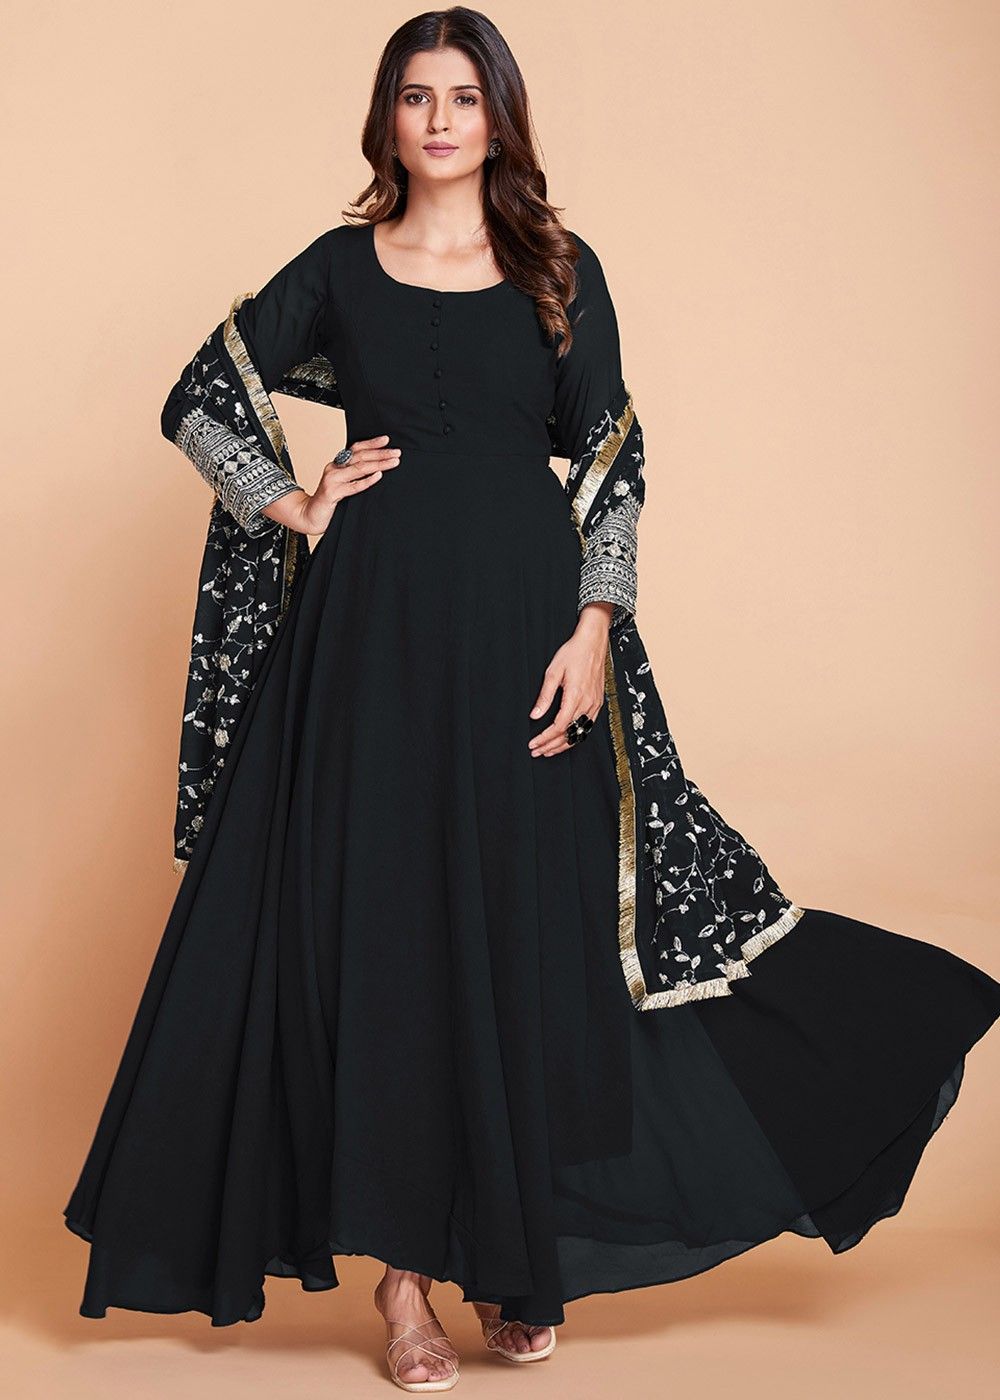 Buy Black Anarkali Suits at Lowest Prices Online In India | Tata CLiQ